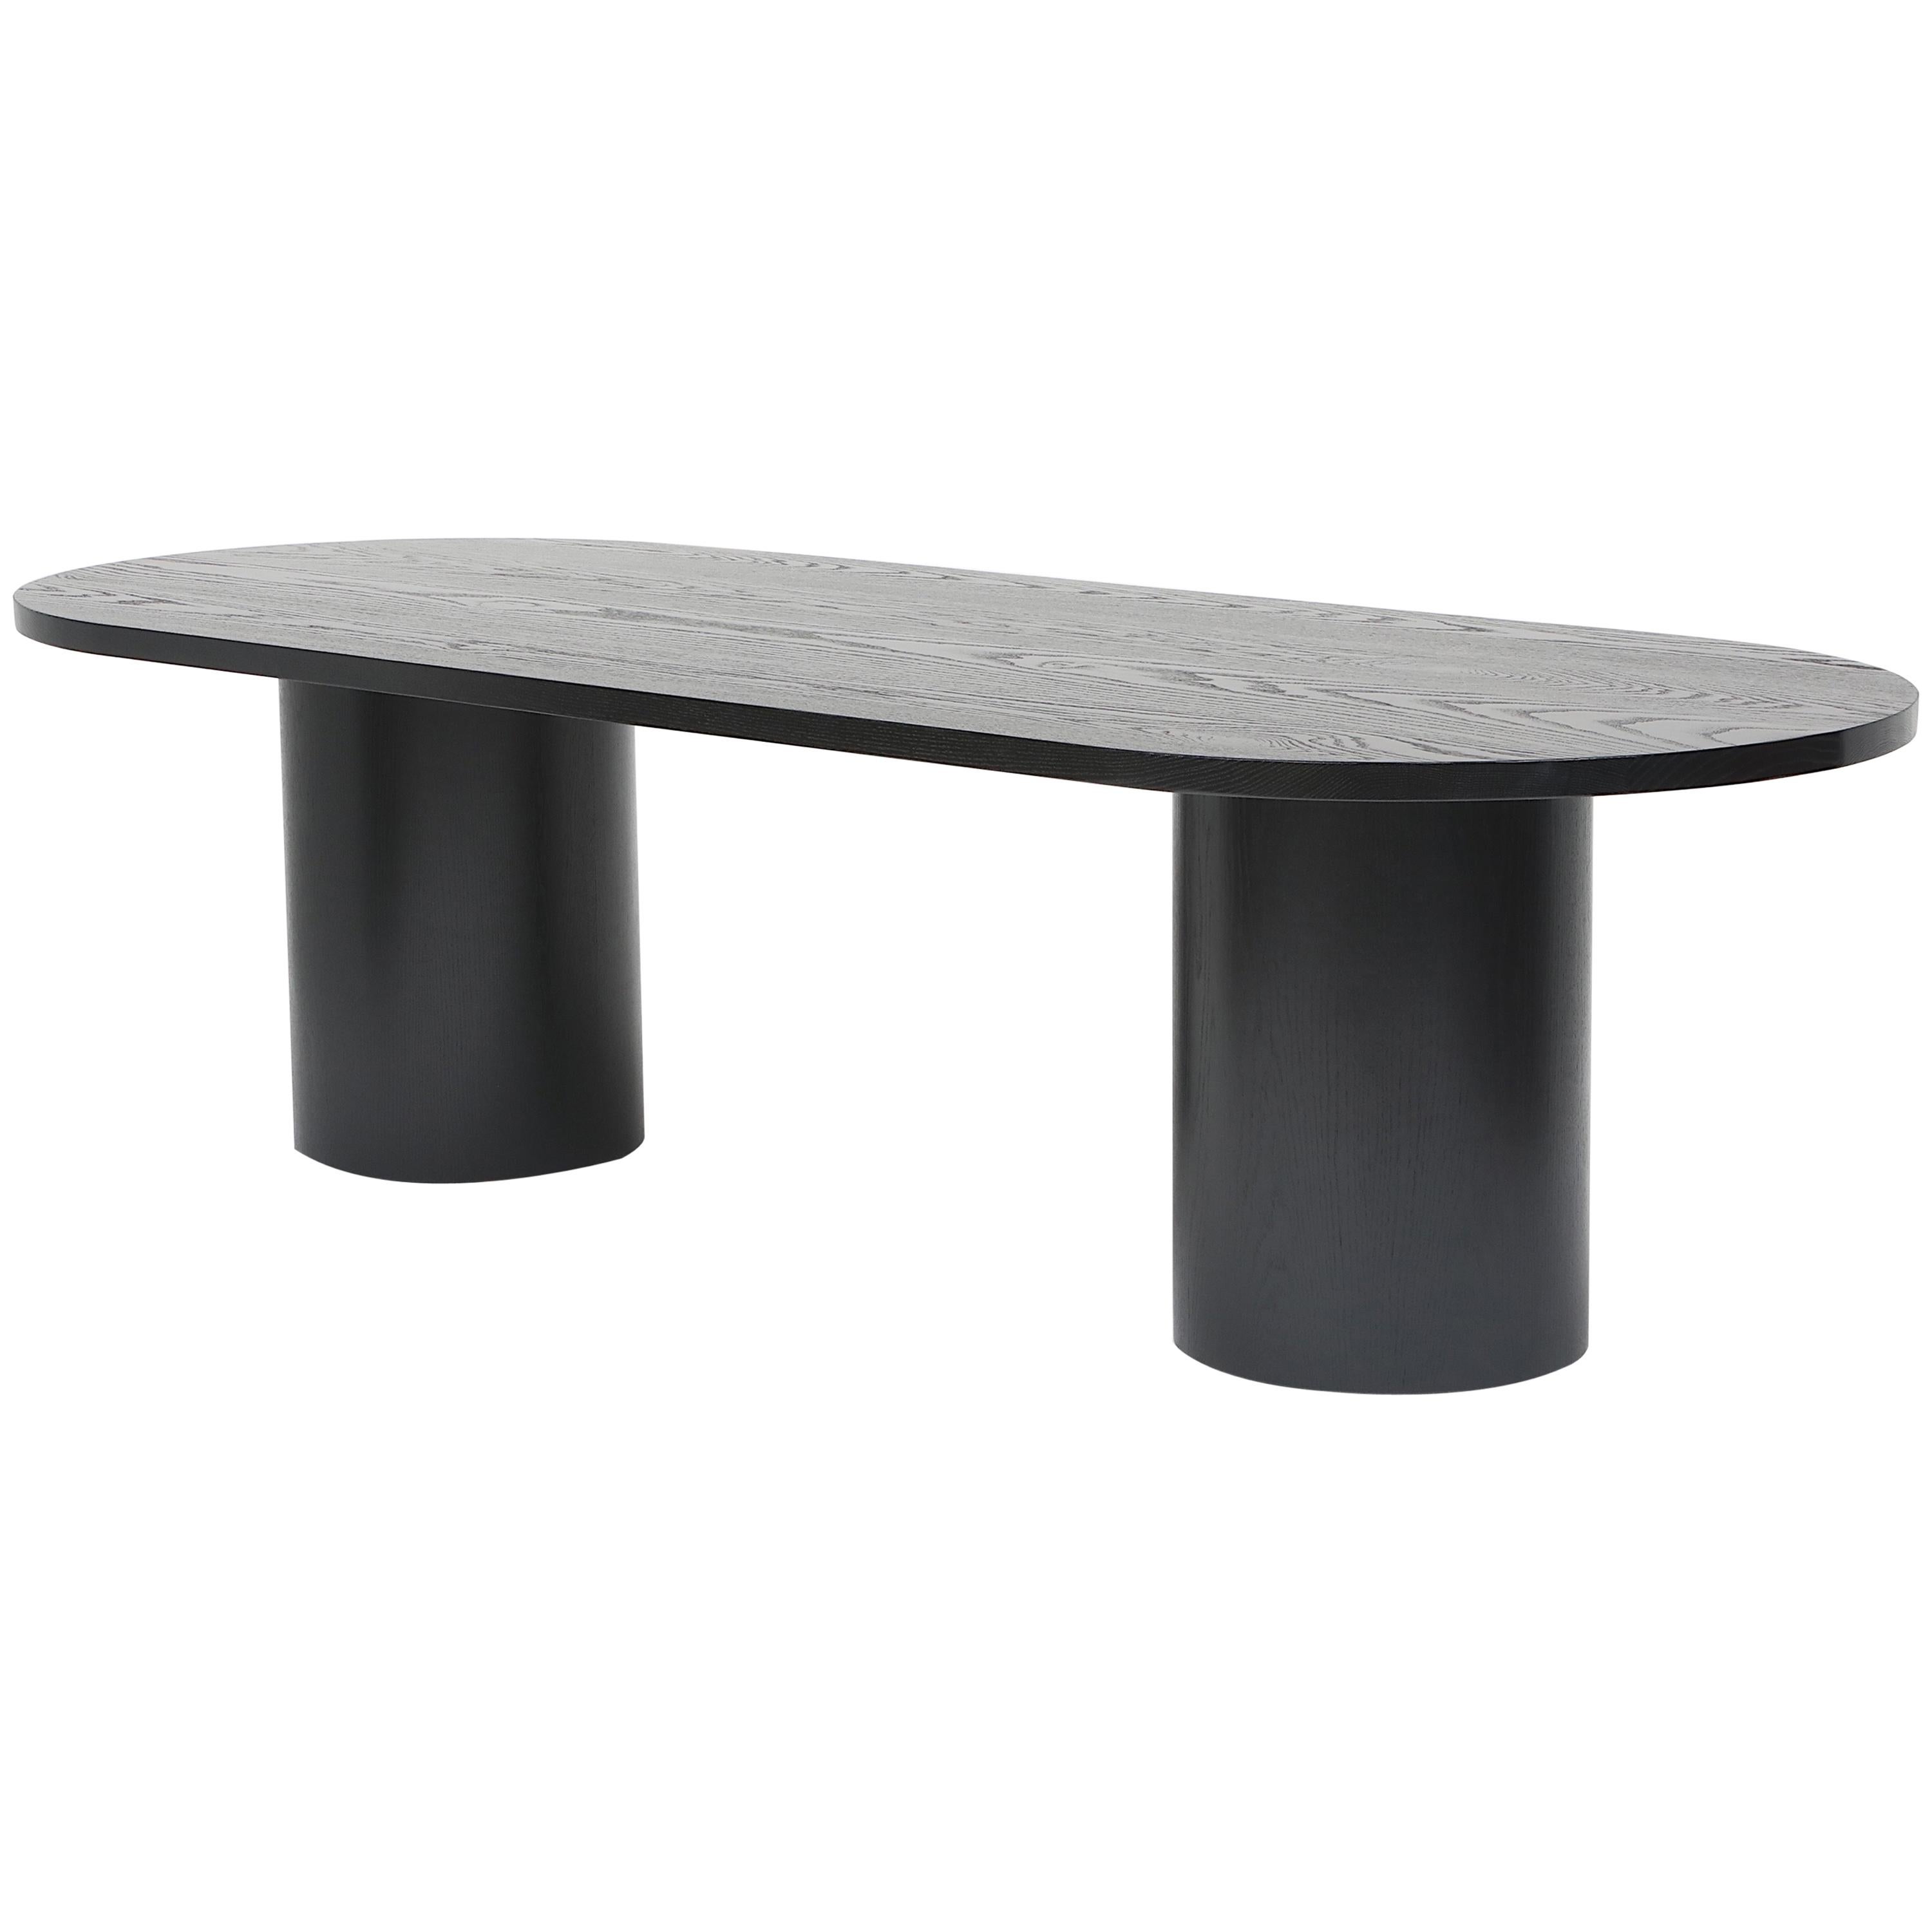 Solid Oakwood Dining Table with Cylinder Legs in Black